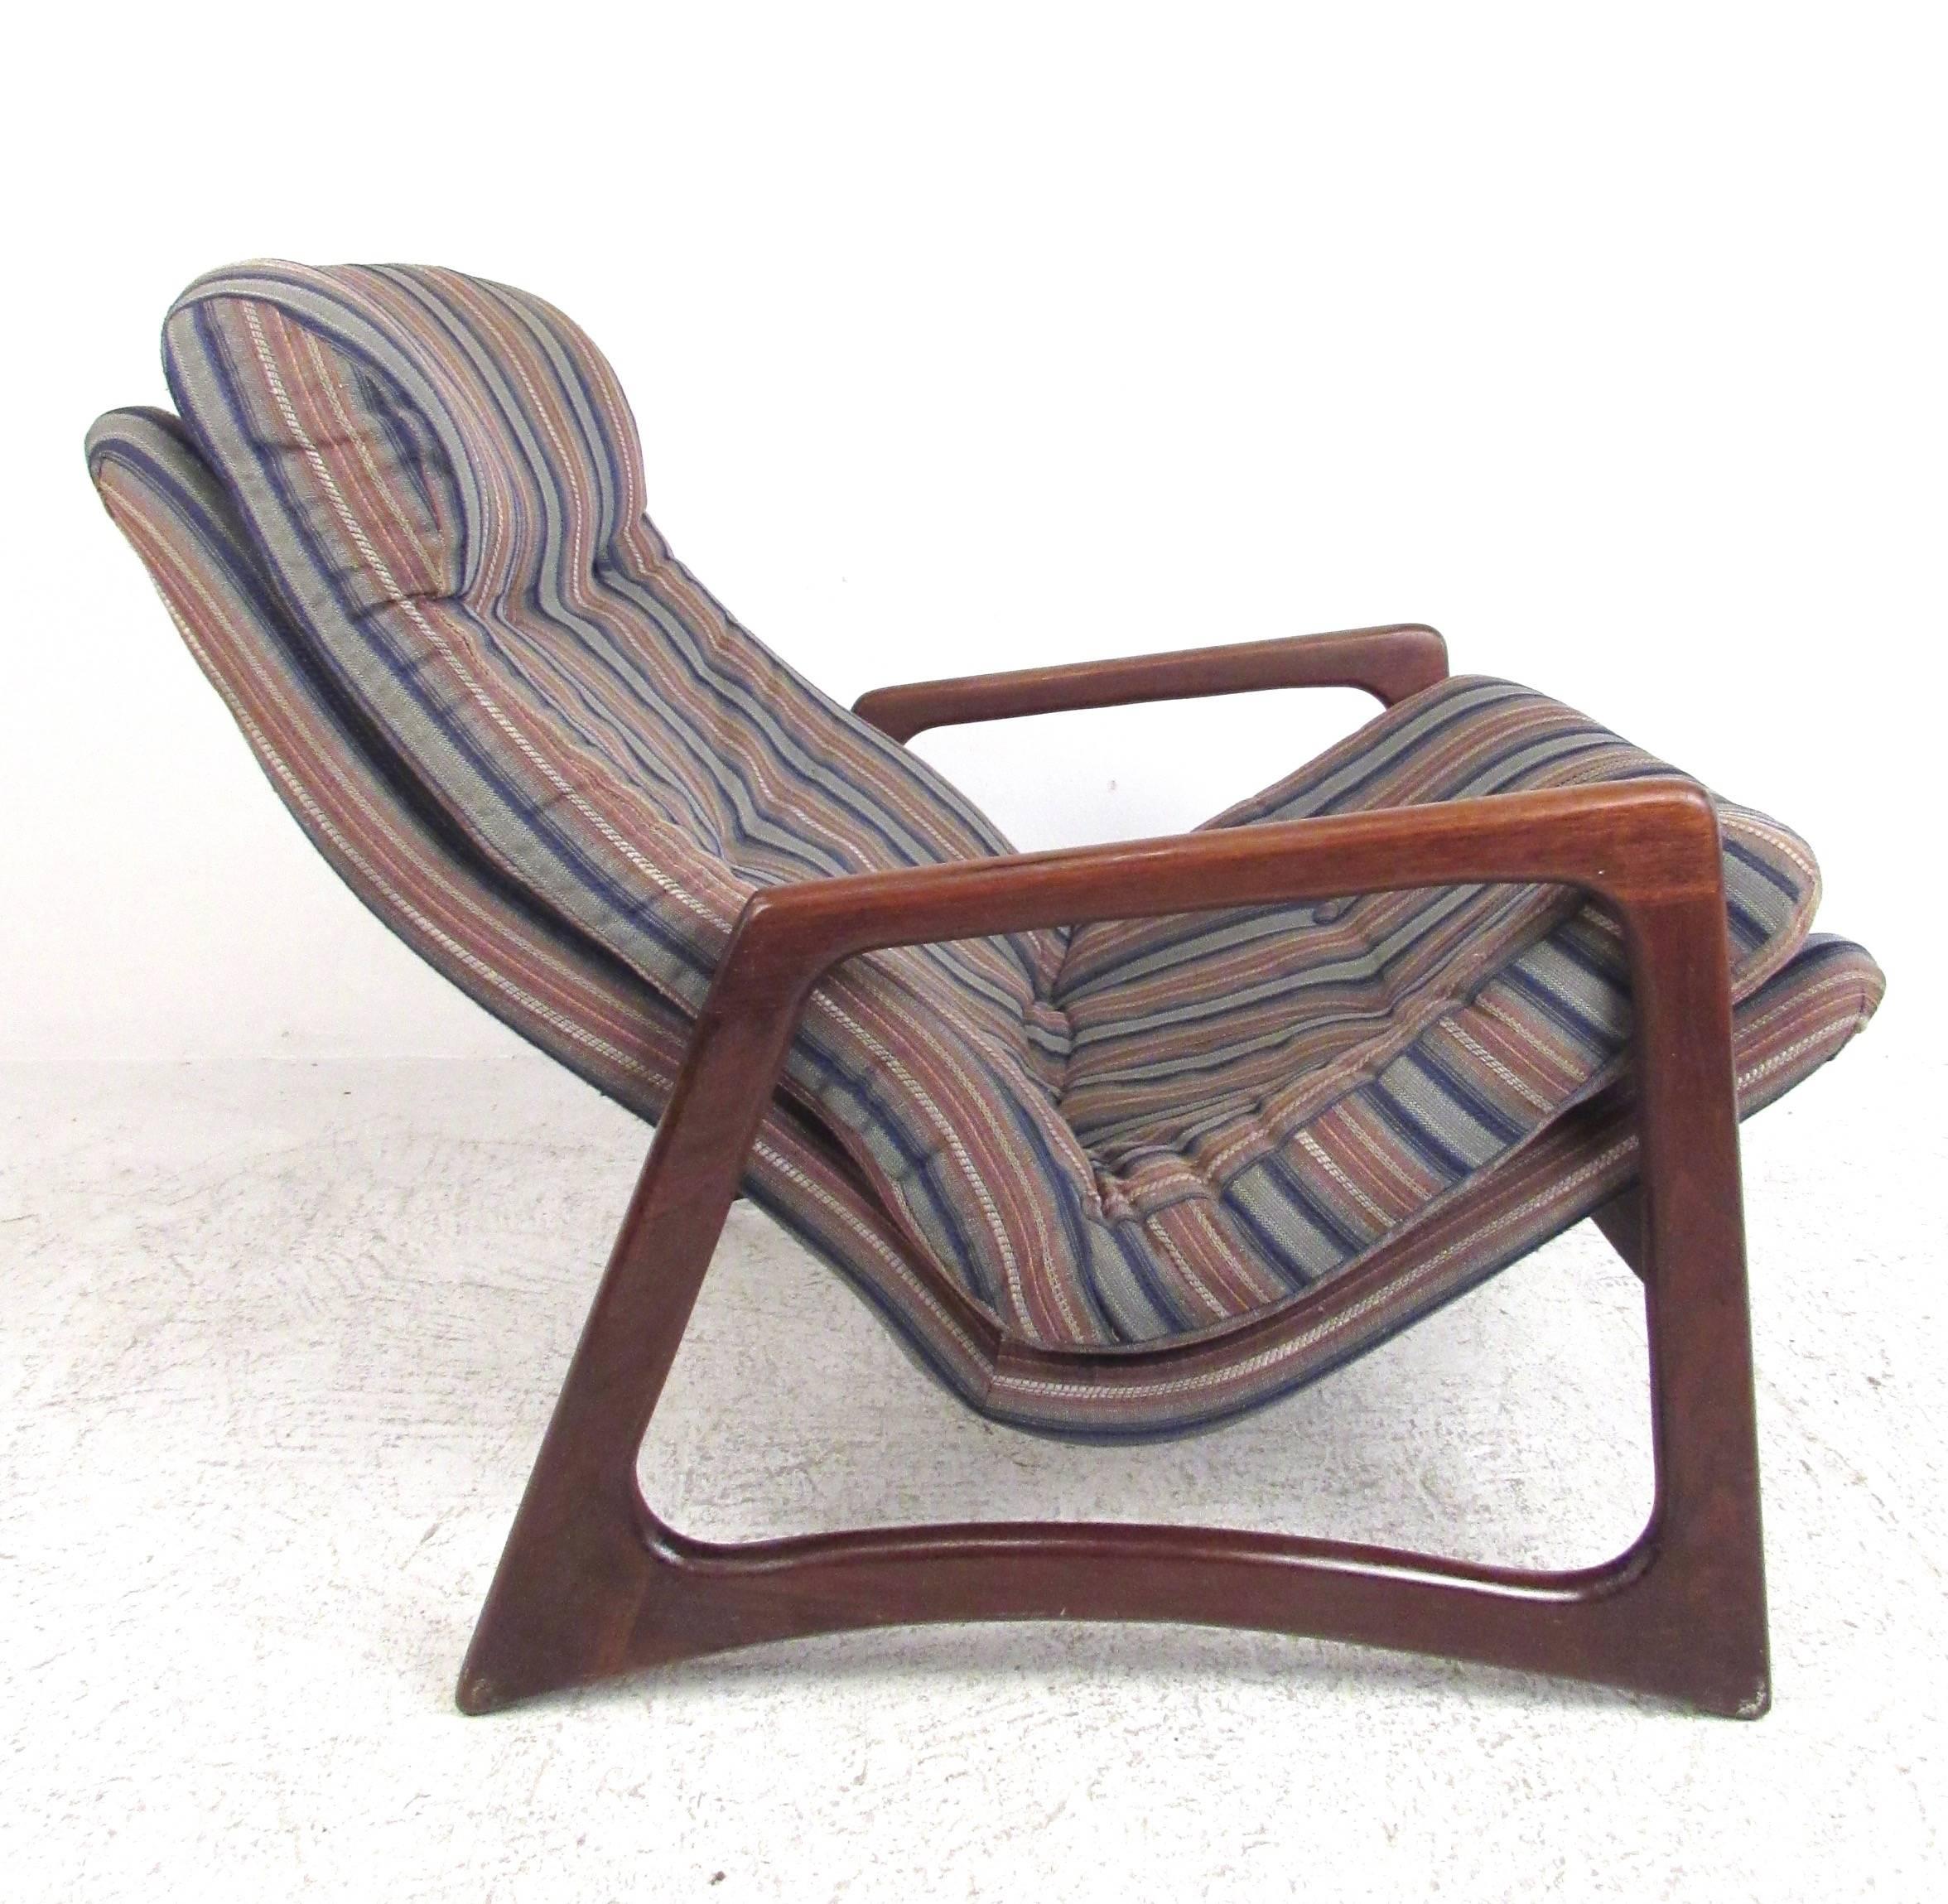 This vintage walnut lounge chair features a tufted high back lounge chair with uniquely sculpted frame. This Adrian Pearsall style chair makes a comfortable and stylish Mid-Century addition to any setting. Please confirm item location (NY or NJ).